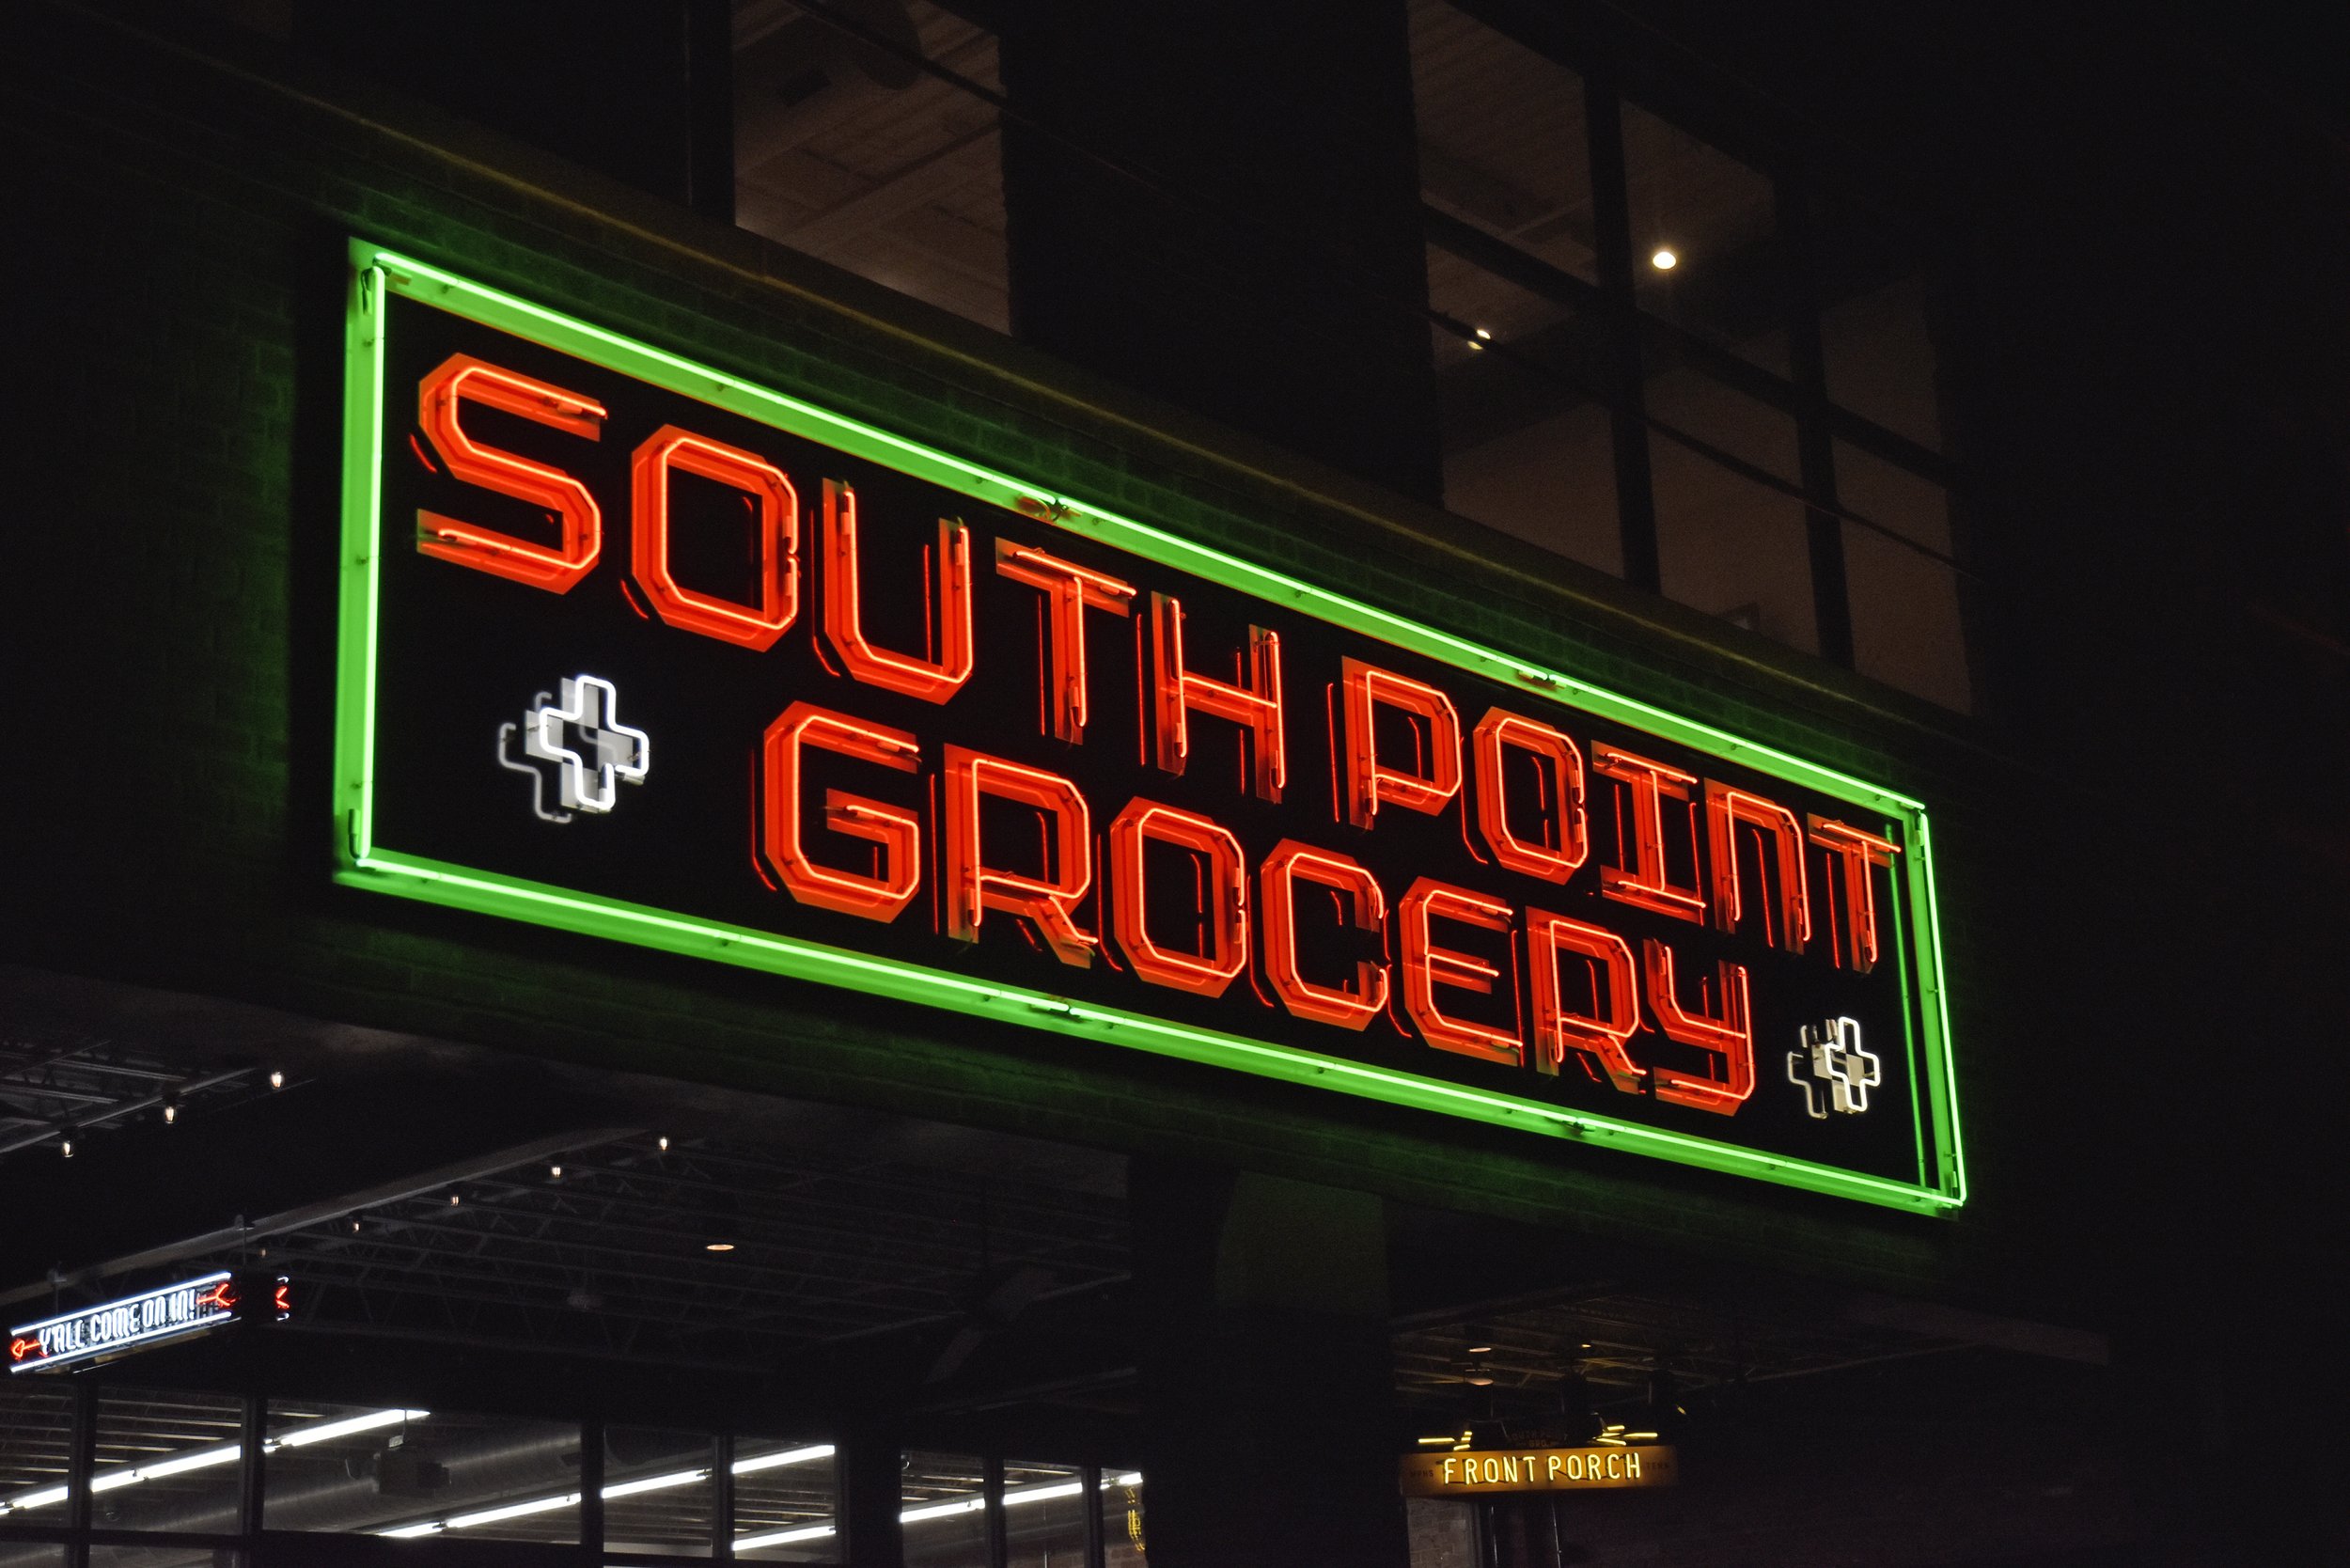  South Point Grocery  Downtown Memphis  Main entrance neon cabinet sign  Branding creative and design by Chuck Mitchell  Logo font design by Chuck Mitchell and Whitt Mitchell  Sign fabrication and installation by Frank Balton Sign Company 